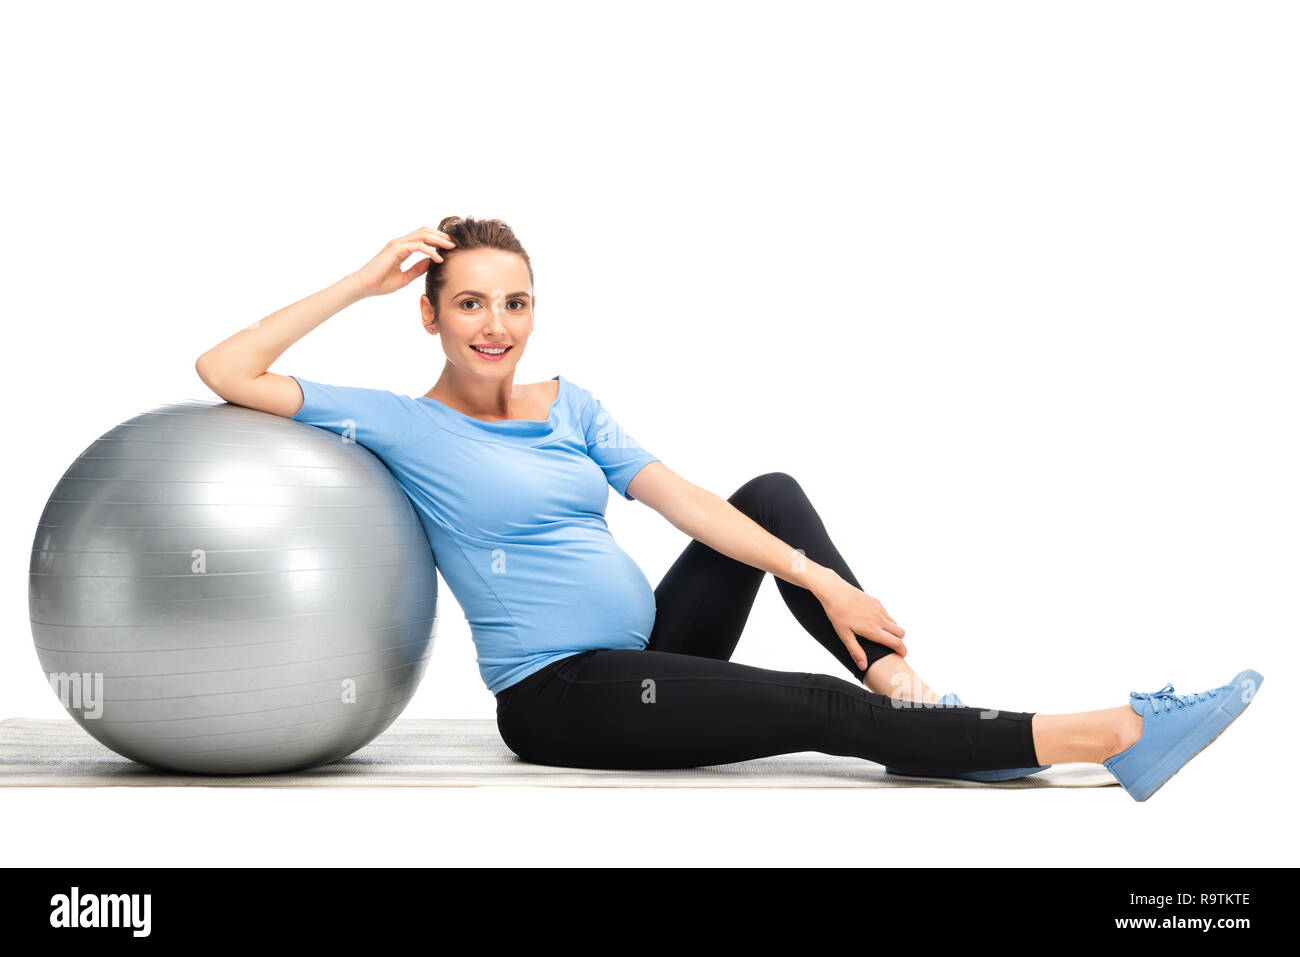 Brown haired pregnant woman sitting on floor with gray fitness ball isolated on white Banque D'Images